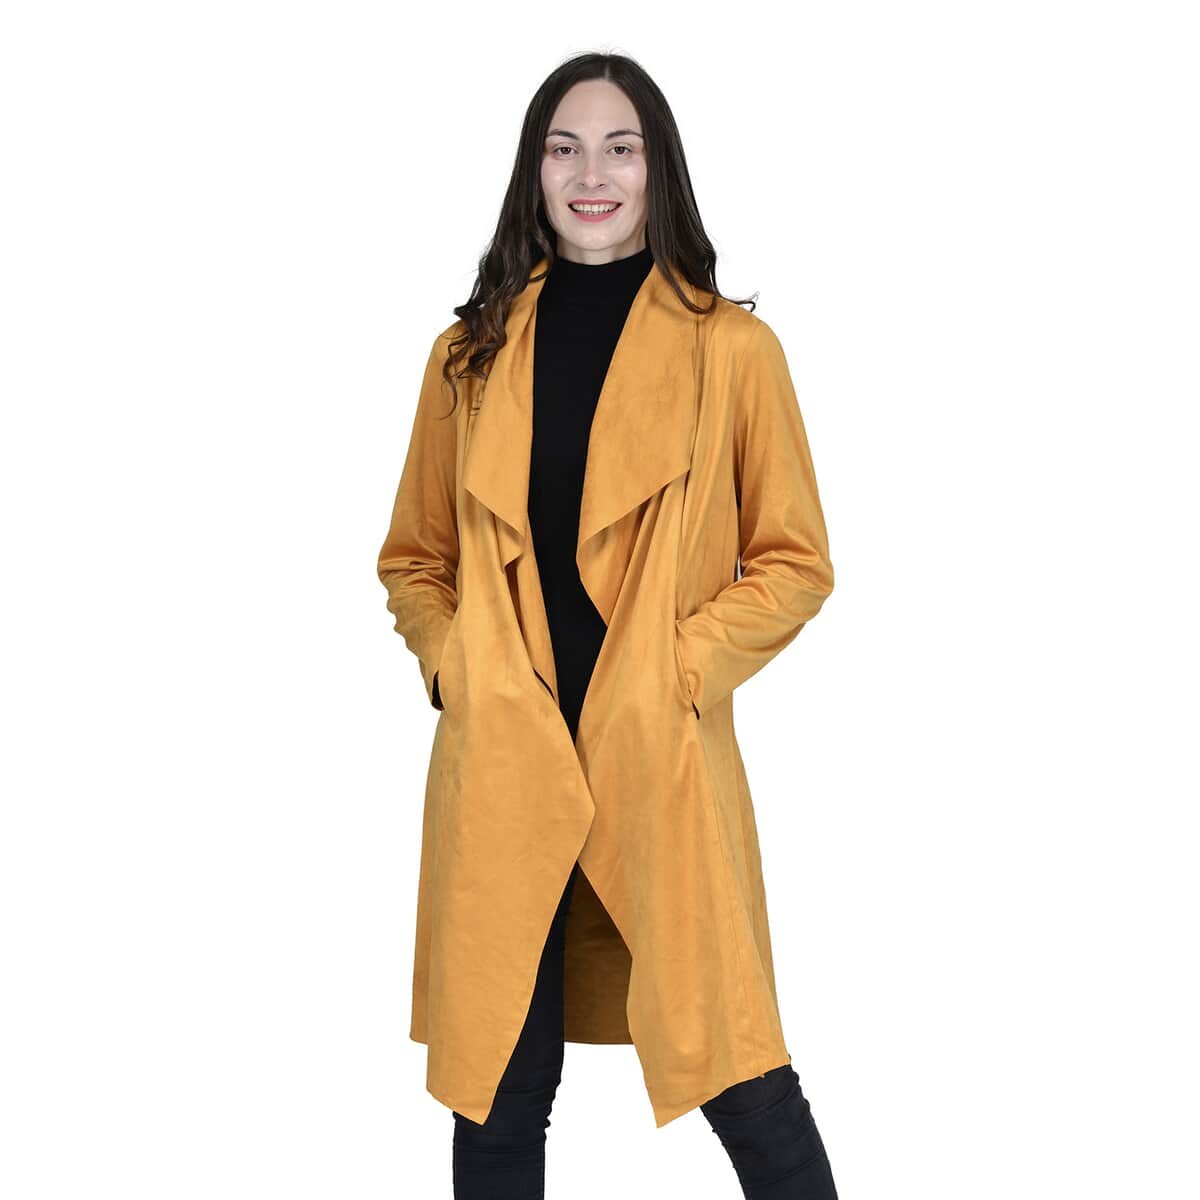 Passage Gold Faux Suede Long Waterfall Open Front Jacket For Ladies -L, Jacket for Women, Long Coat Jacket for Women, Womens Coats image number 0